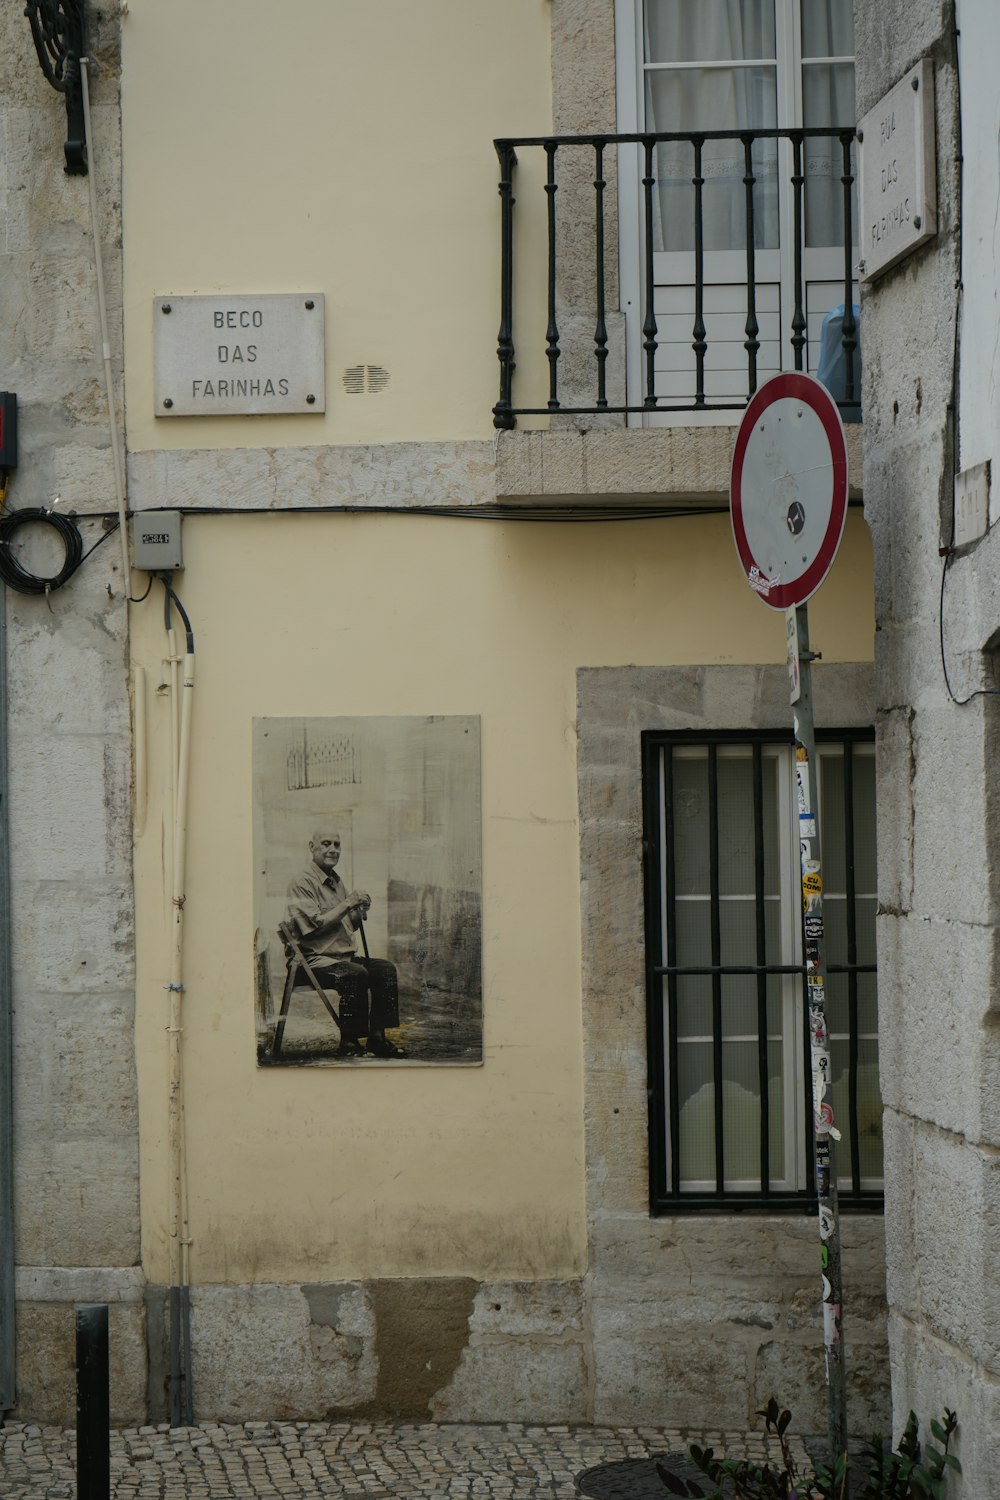 a picture of a man sitting in a chair on the side of a building